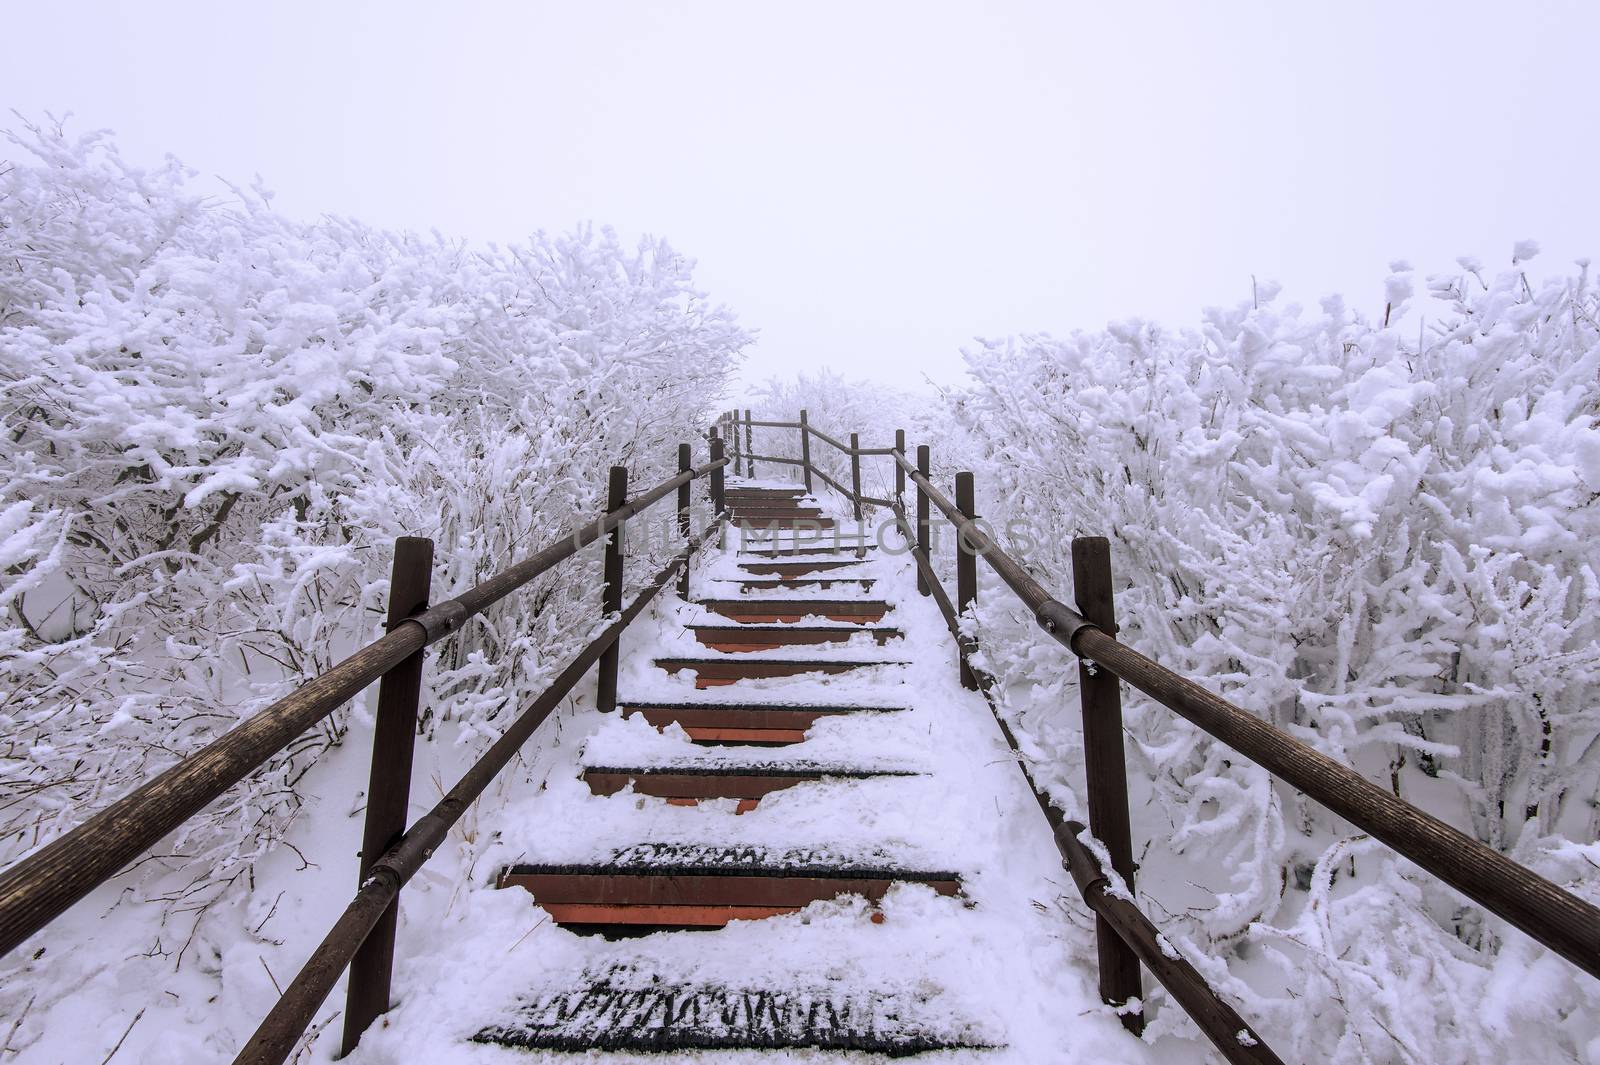 Wooden stairs on a hillside in winter. Deogyusan mountains in South Korea.